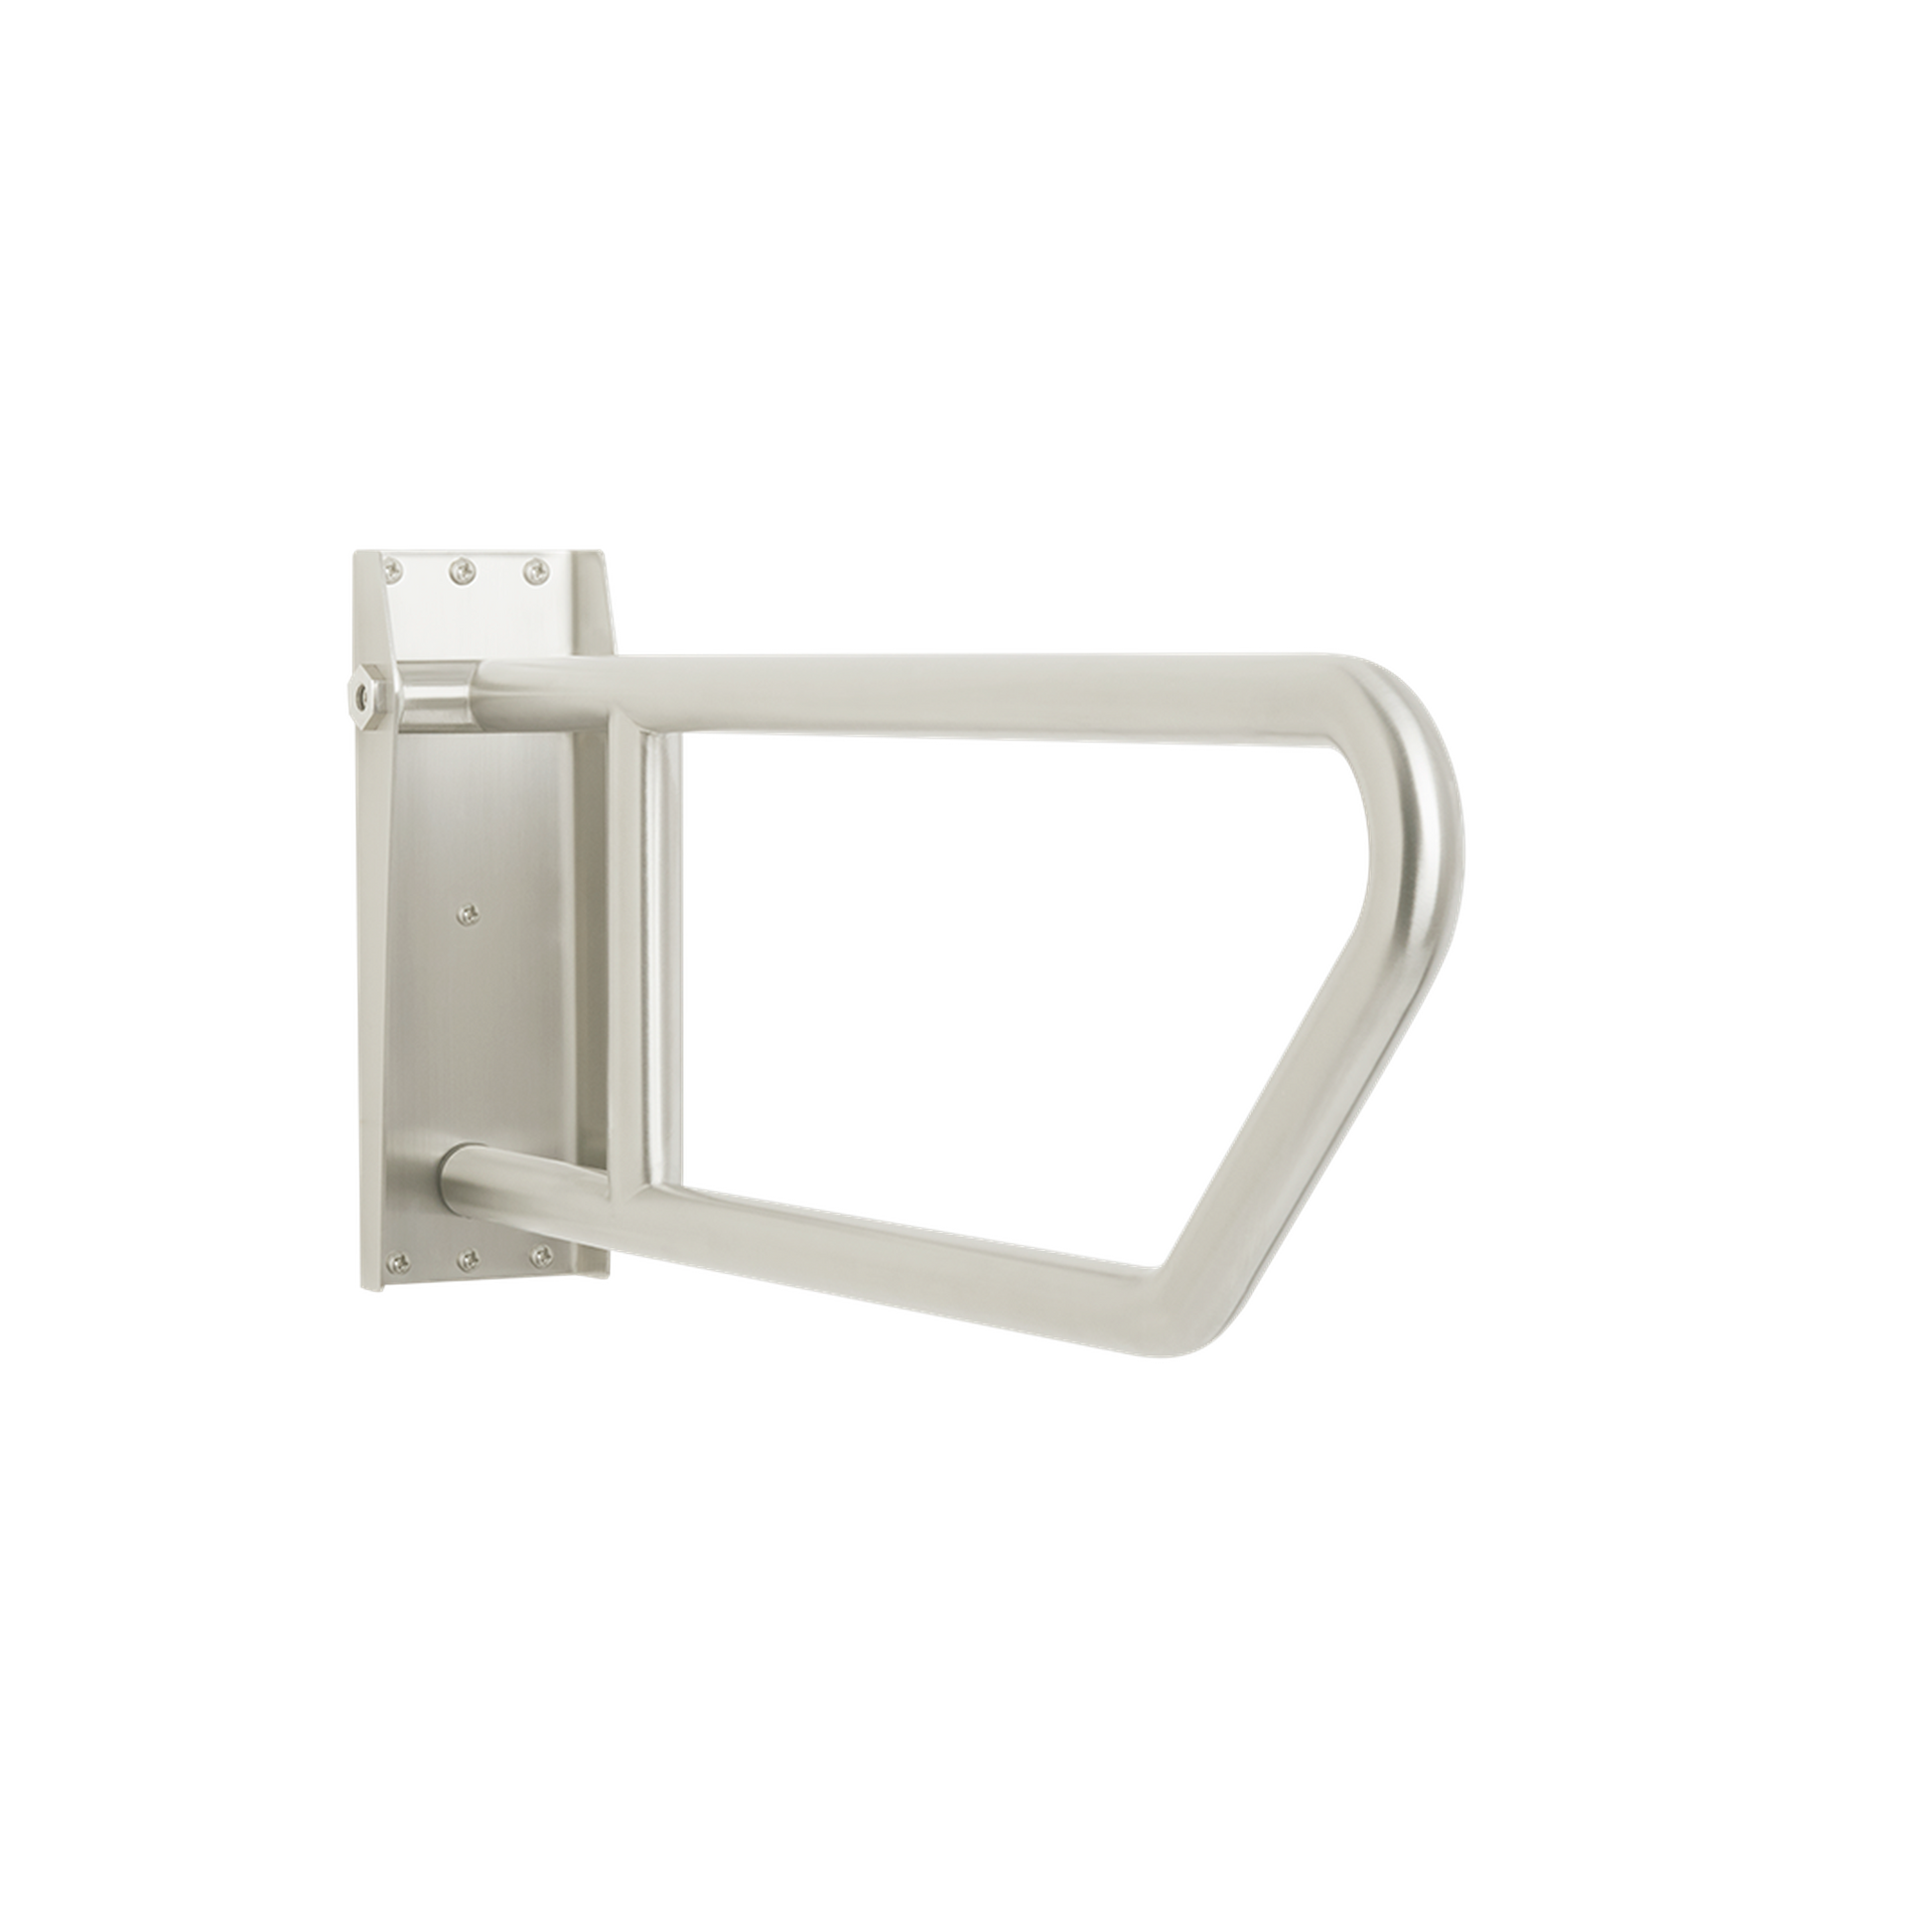 Seachrome Signature Series 30" x 10" Satin Stainless Steel Exposed Flange Swing-Up Grab Bar